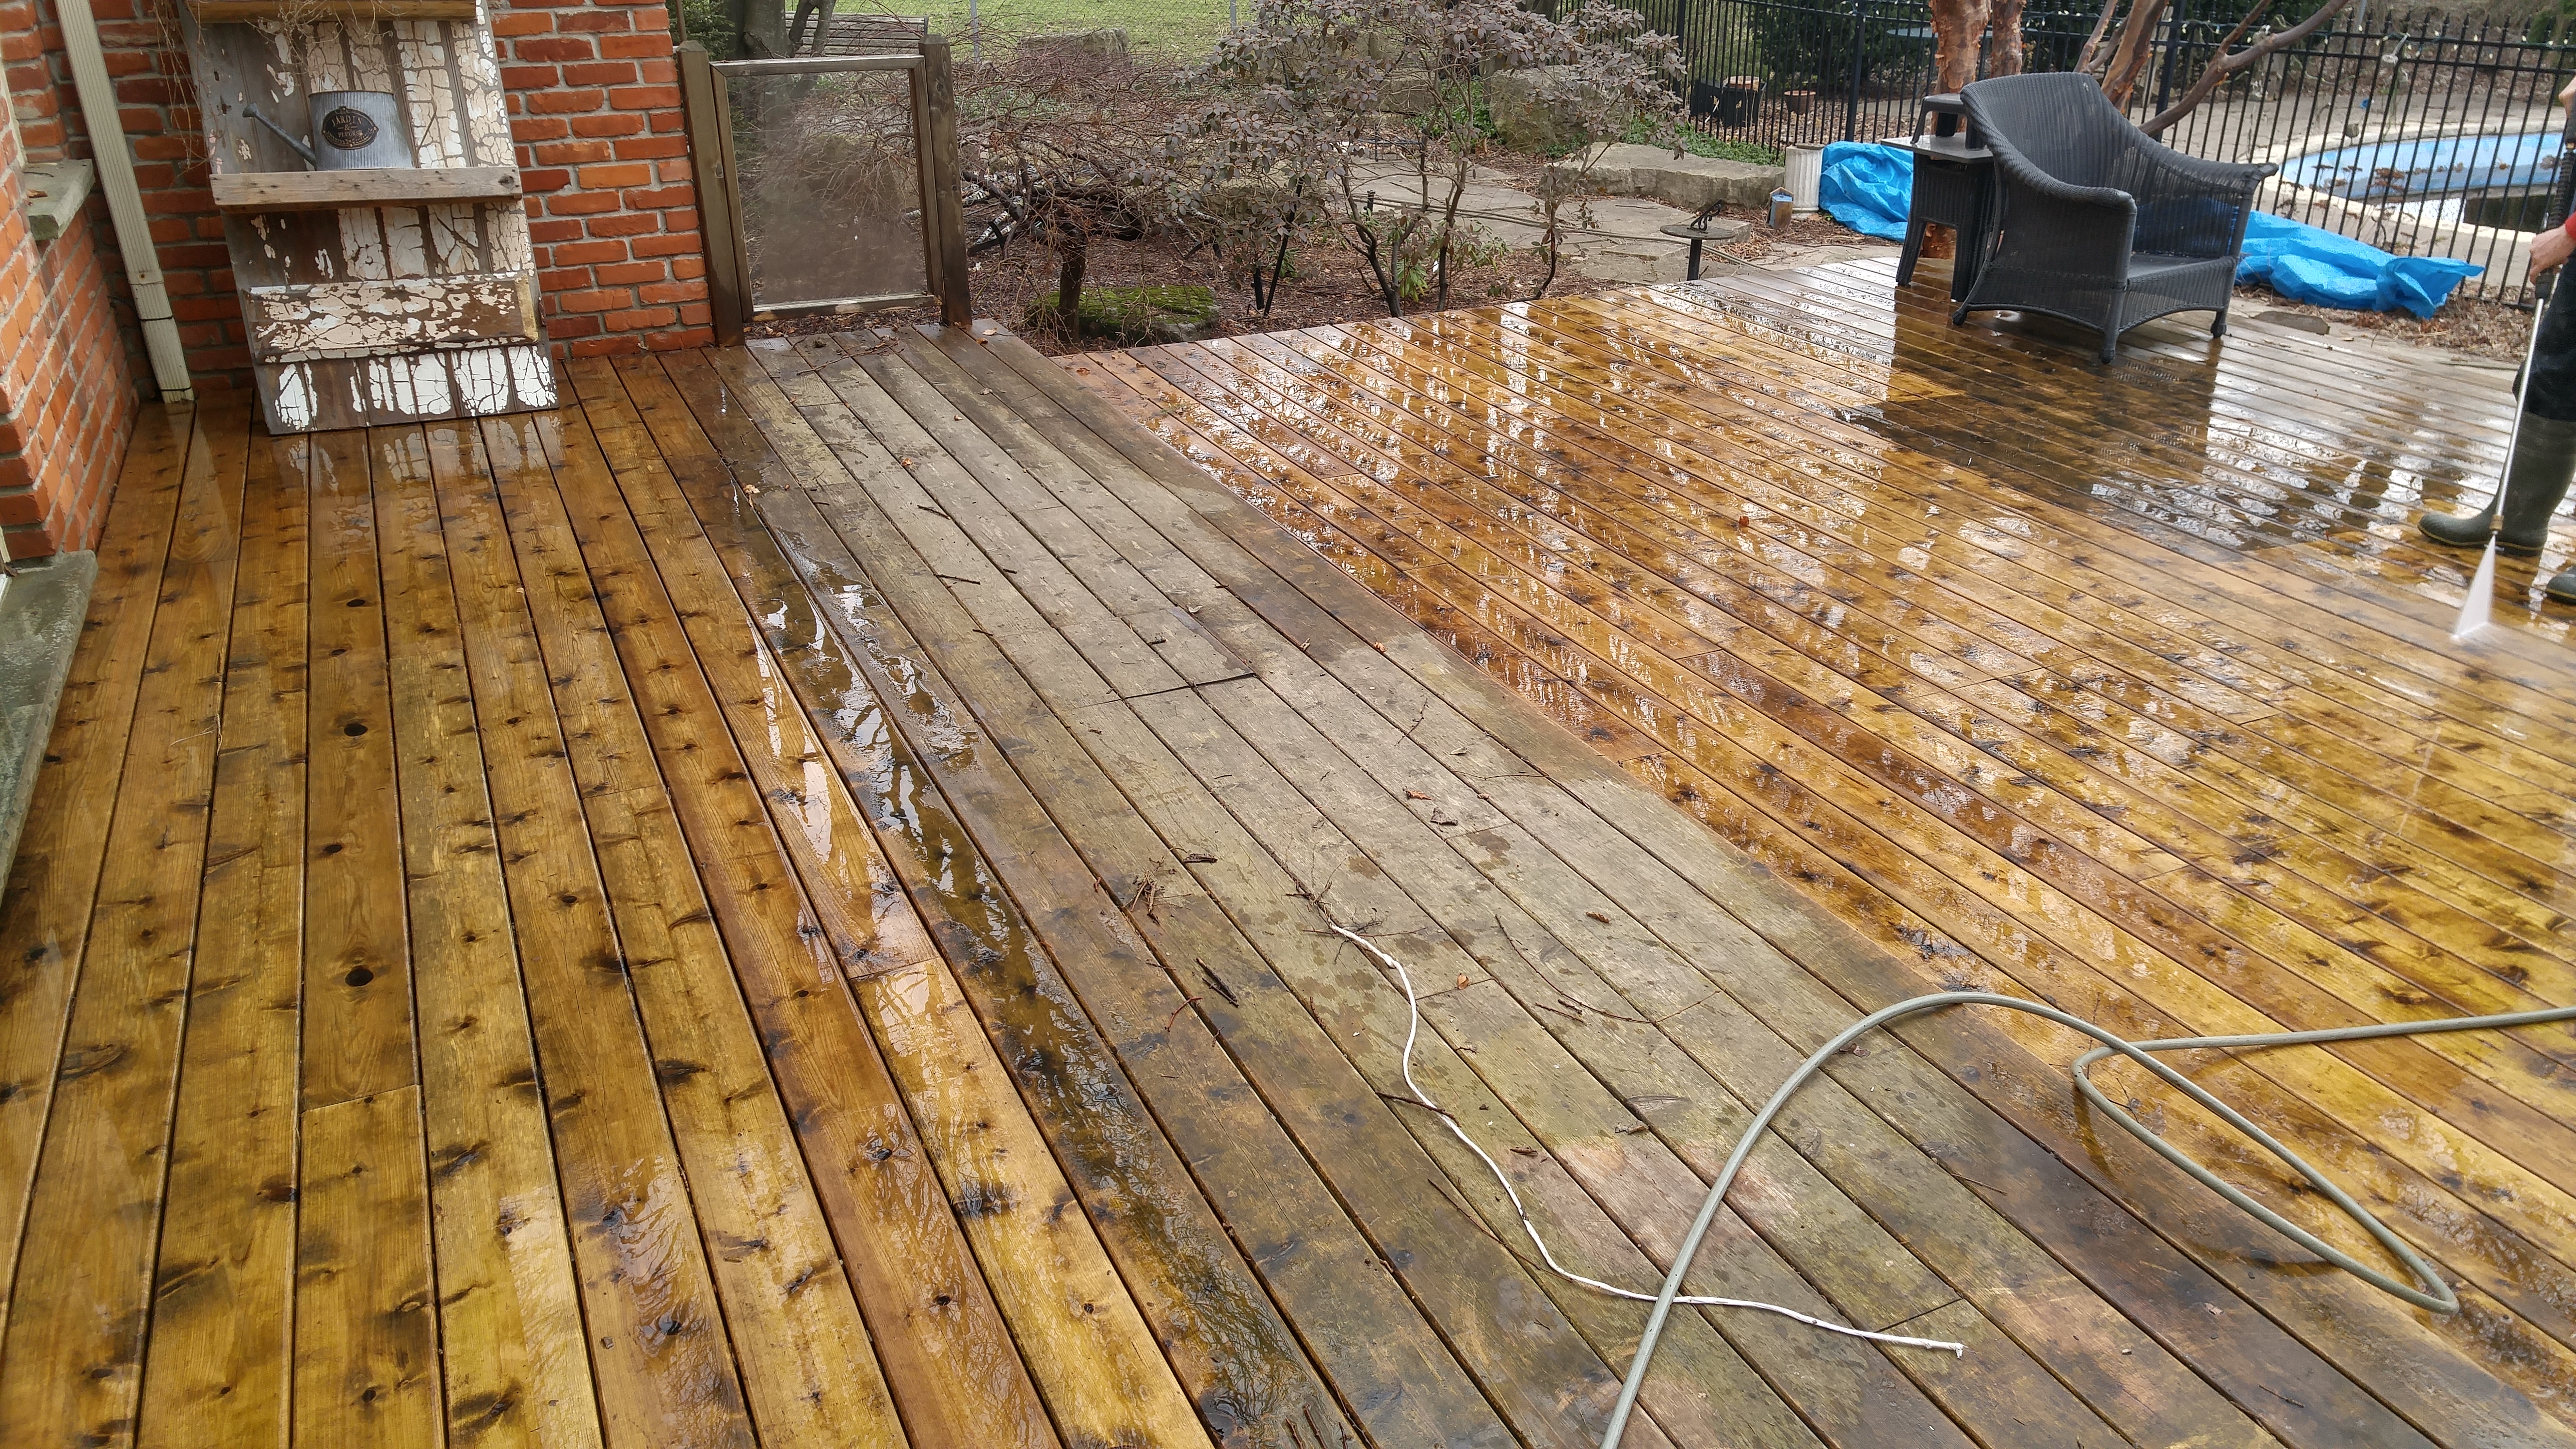 Deck before and after